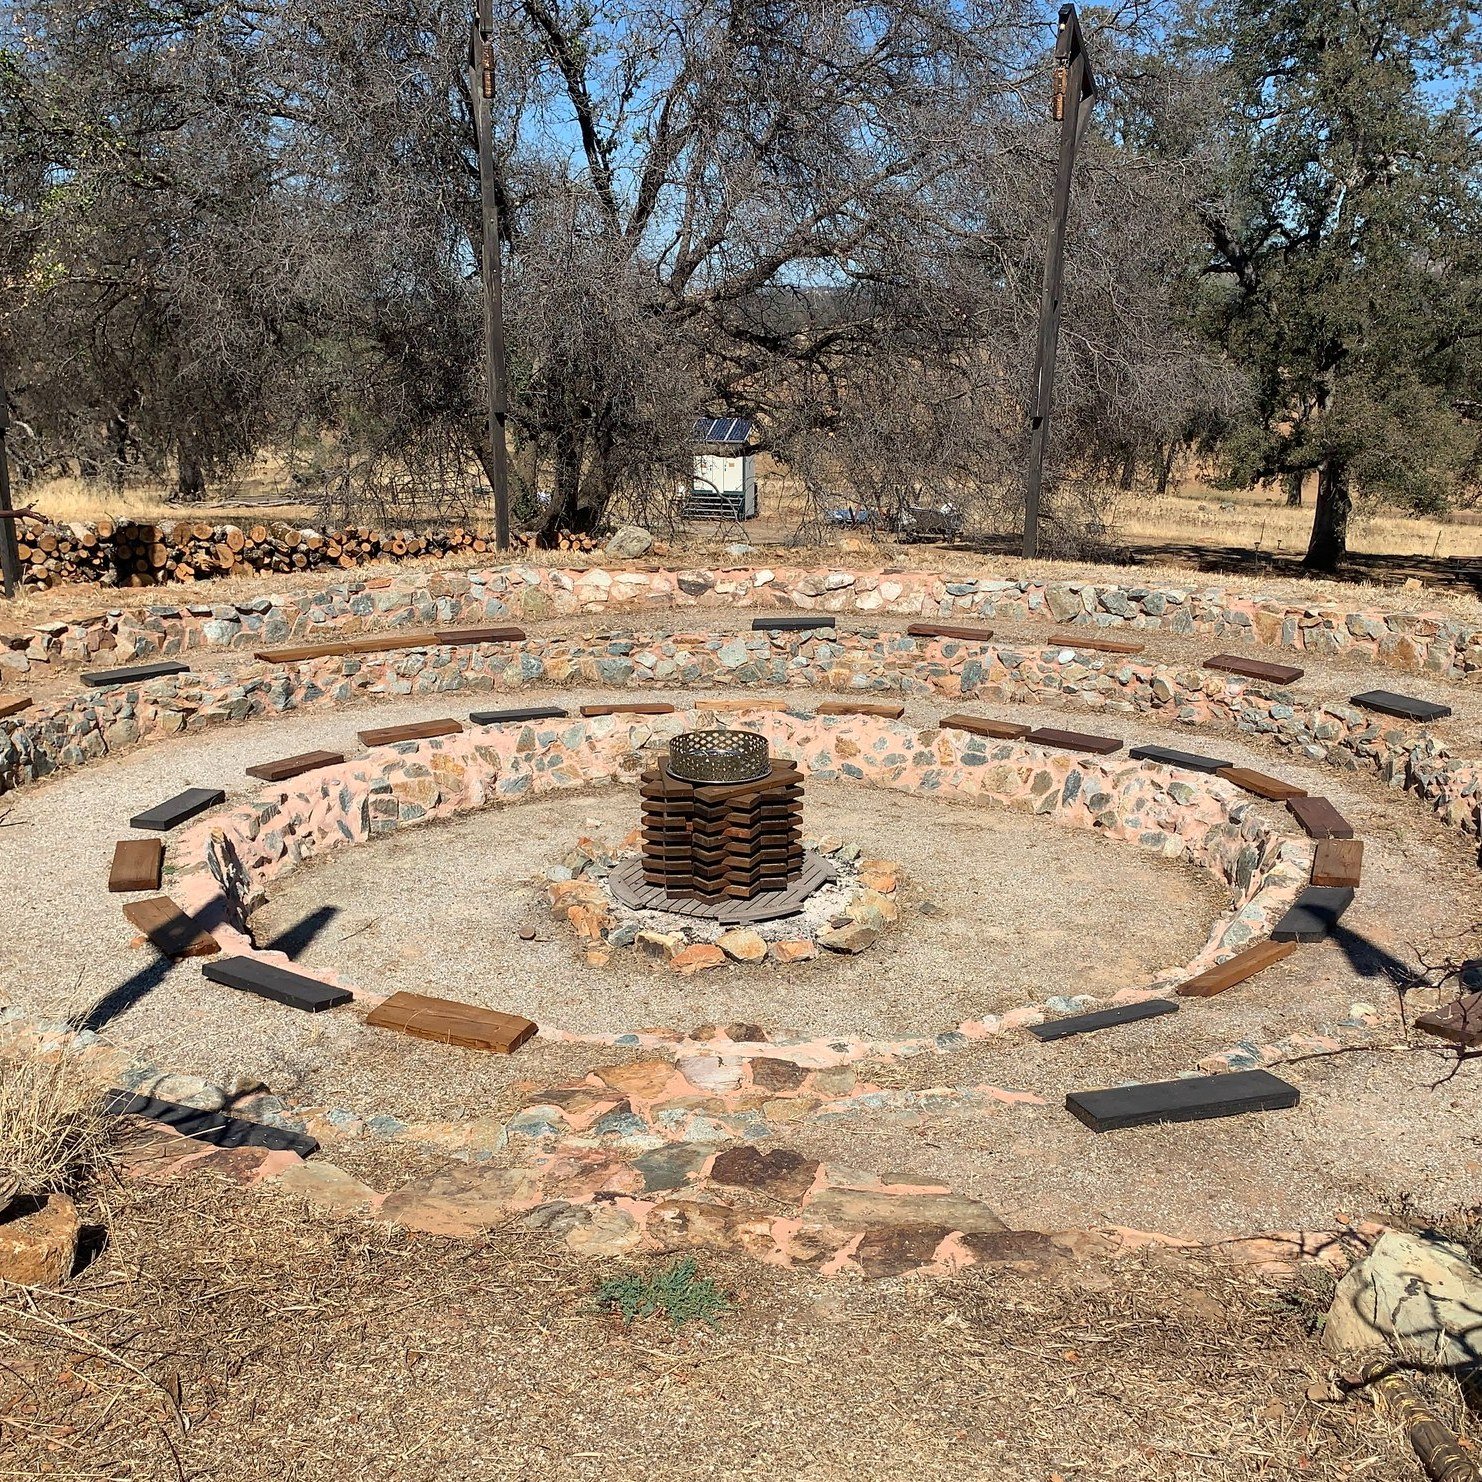 I've always loved the idea of sunken fire pits and the group at @theheartlandcollective in Wheatland, CA have created a beautiful example. What's your favorite style of fire pit? 

#firepit #firepits #gathering #nature #outdoorlife #outdoorliving #bo